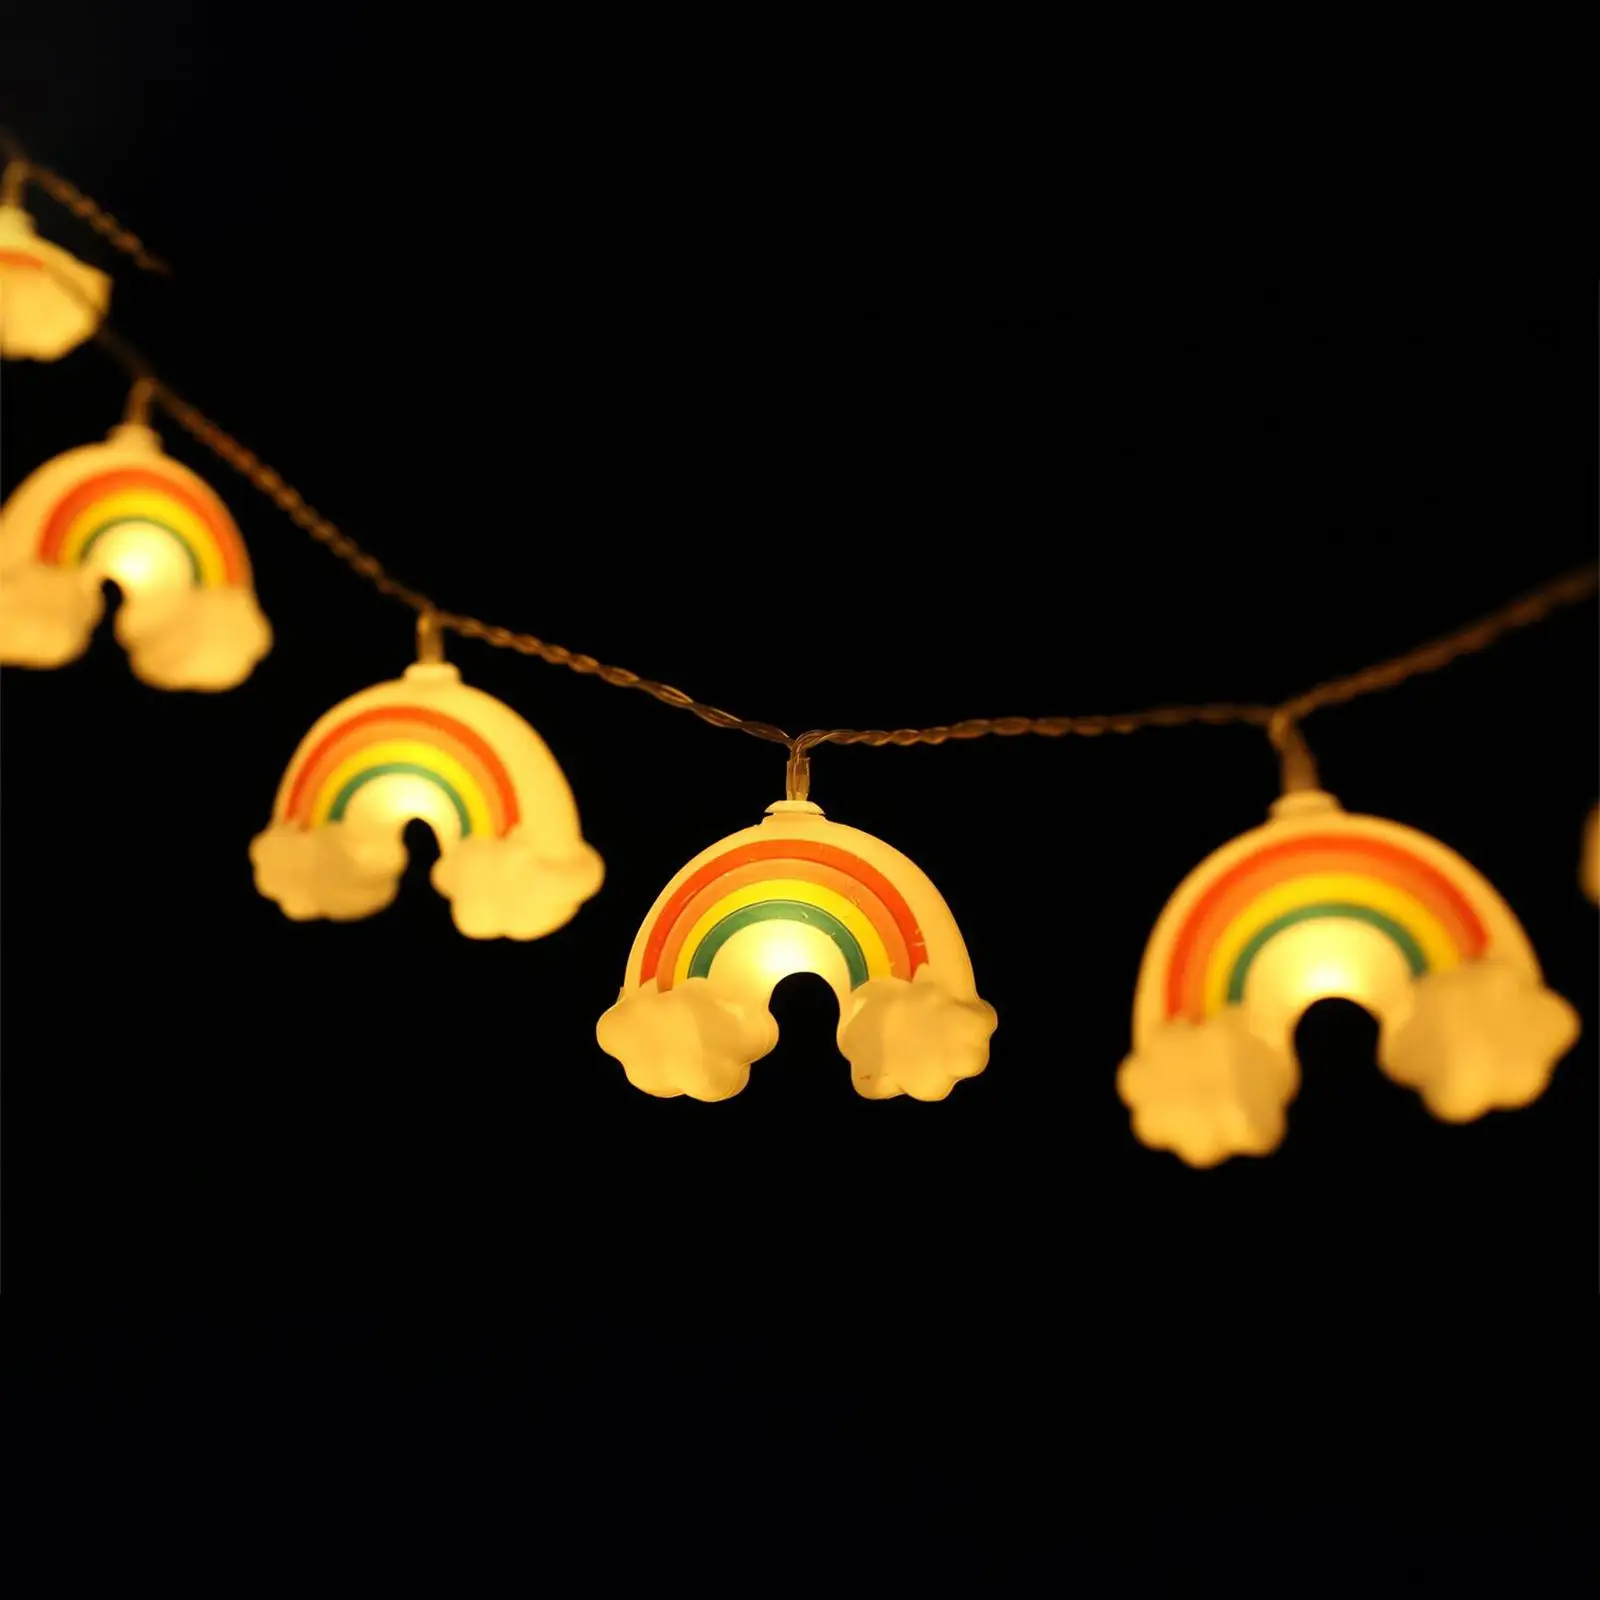 LED Rainbow String Lights Fairy Lights Funny Waterproof DIY Lamp for Outdoor Patio Summer Beach Camping Wedding Home Ornaments